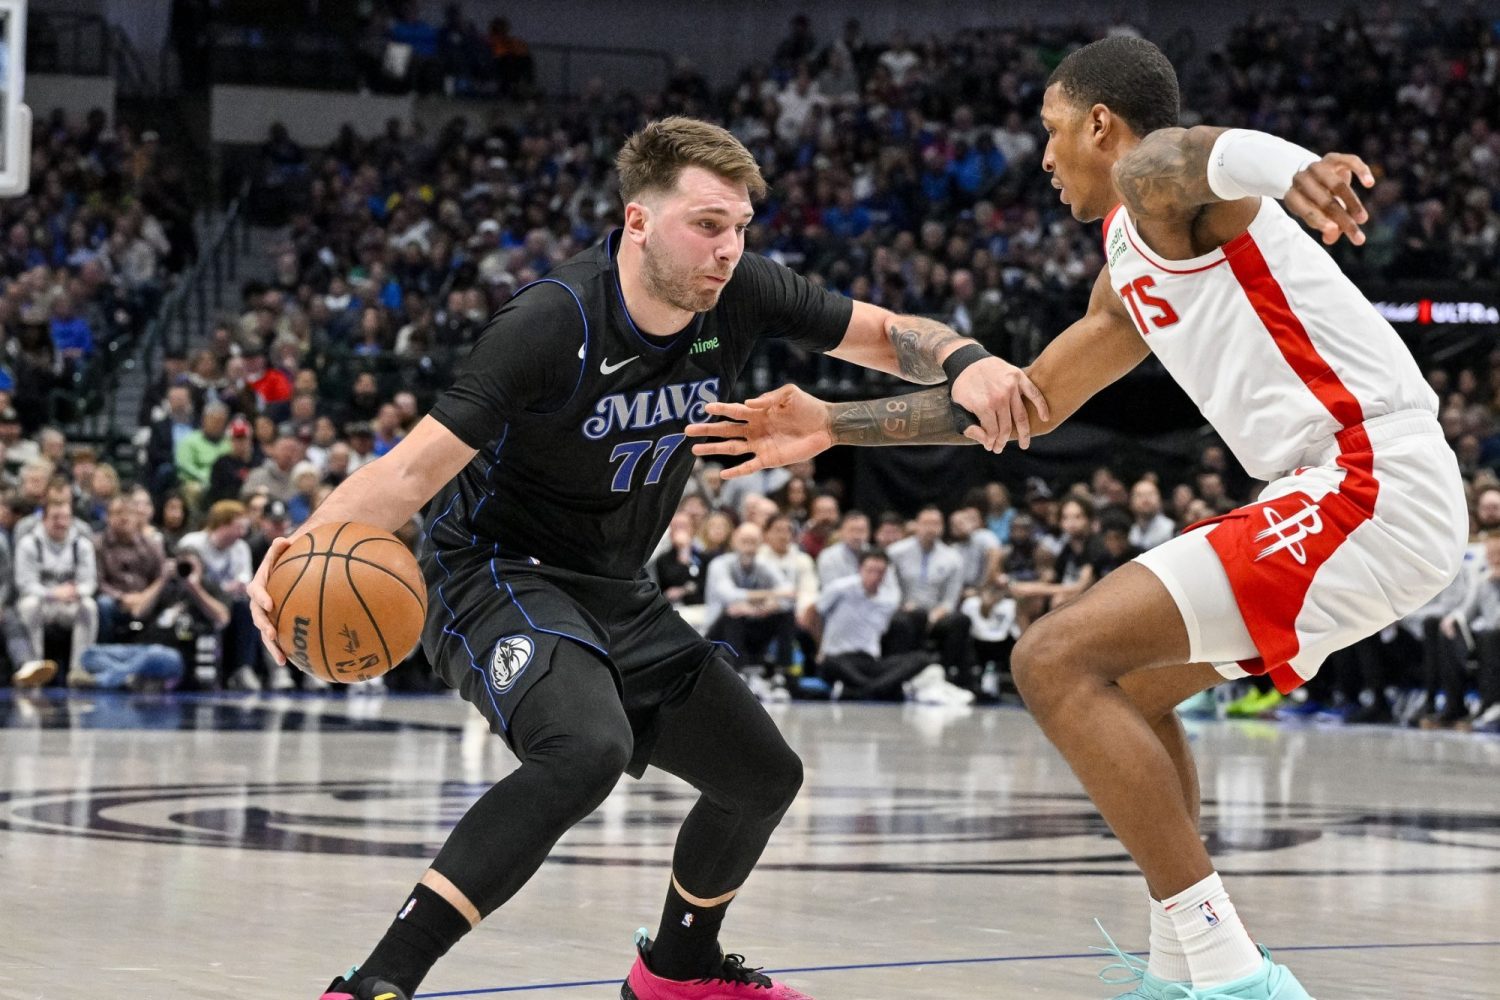 Dallas Mavericks guard Luka Doncic looks to move the ball past Houston Rockets forward Jabari Smith Jr. during the second quarter at the American Airlines Center.